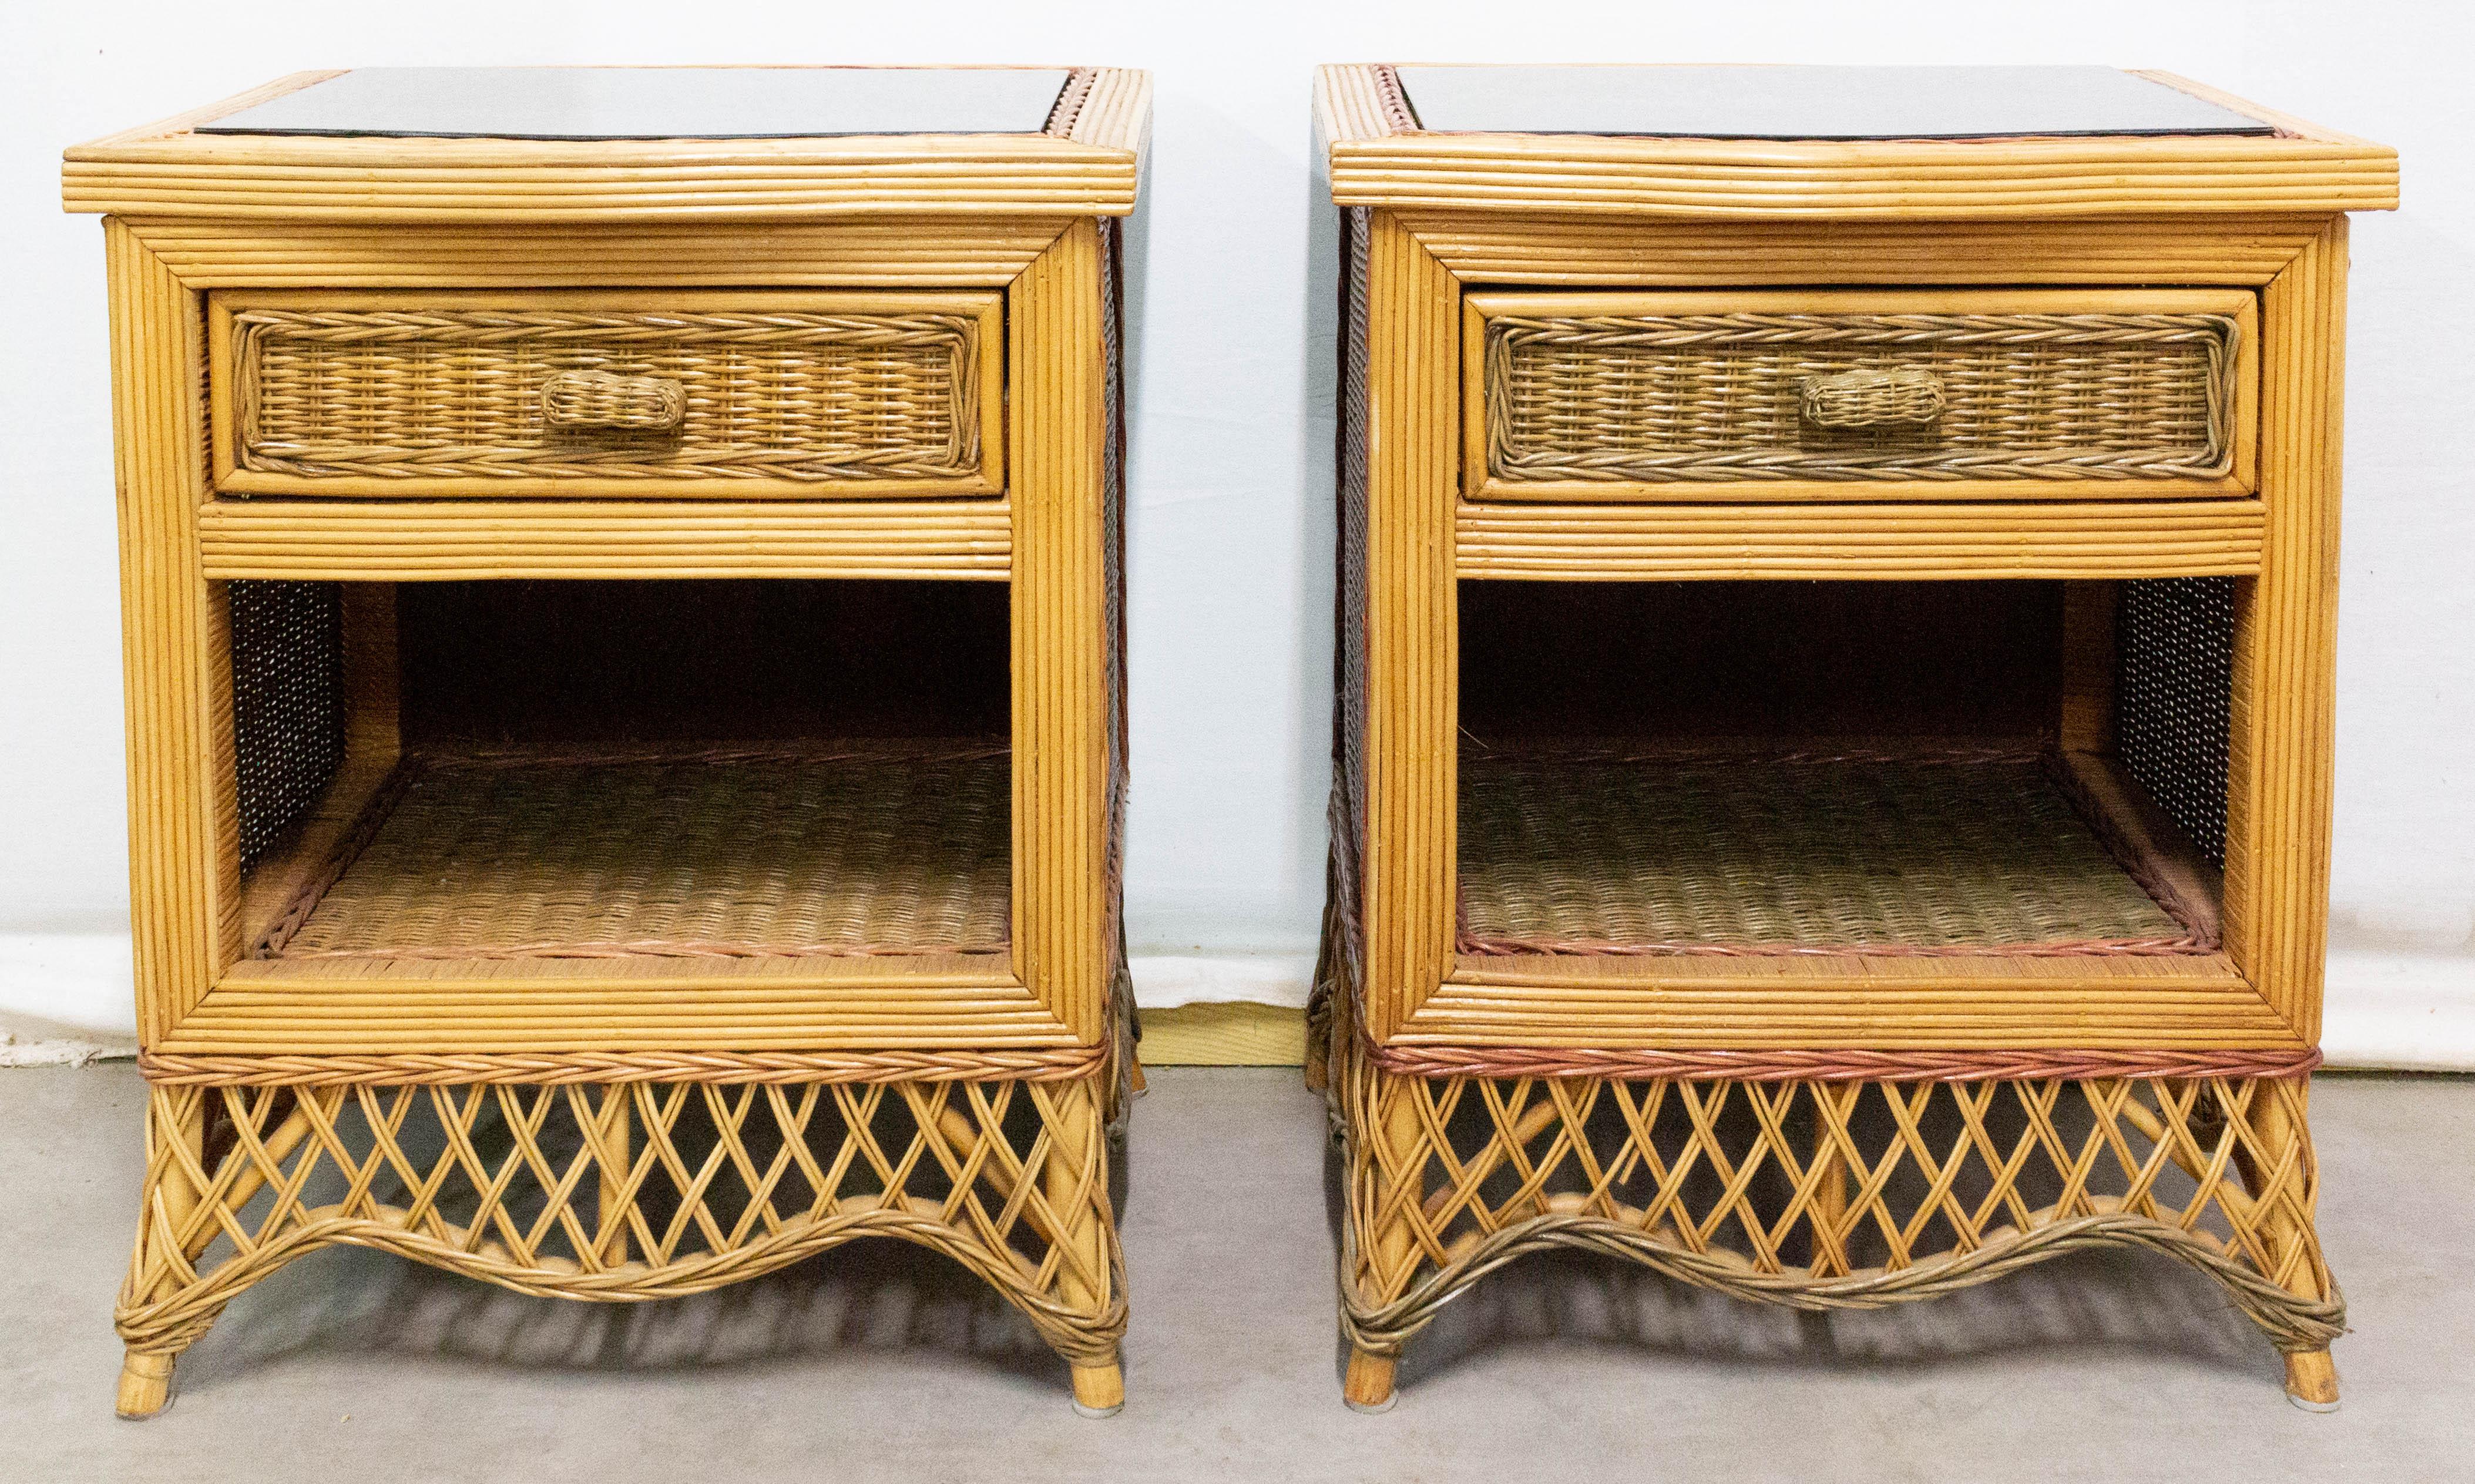 Pair of French side cabinet late 20th century
Multicolored rattan nightstands bedside tables
The mirrors have a light bronze color
Very good condition with only minor marks of use, circa 1990.

For shipping:
1 pack: 45 x 53 x 90cm 21kg.